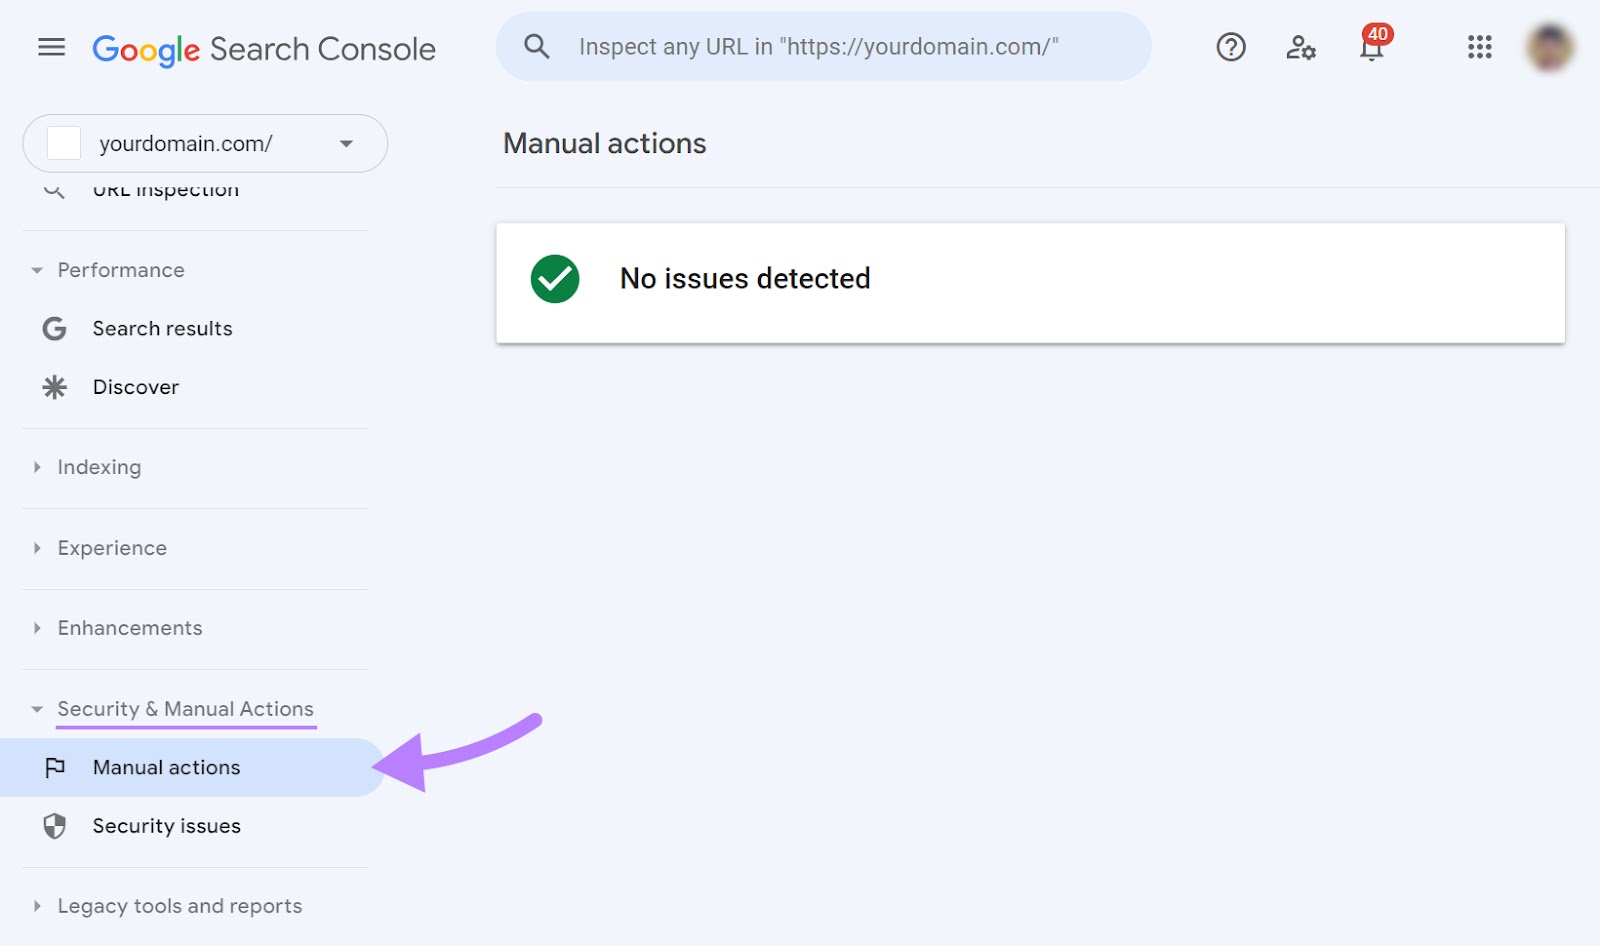 “Manual actions" page in Google Search Console